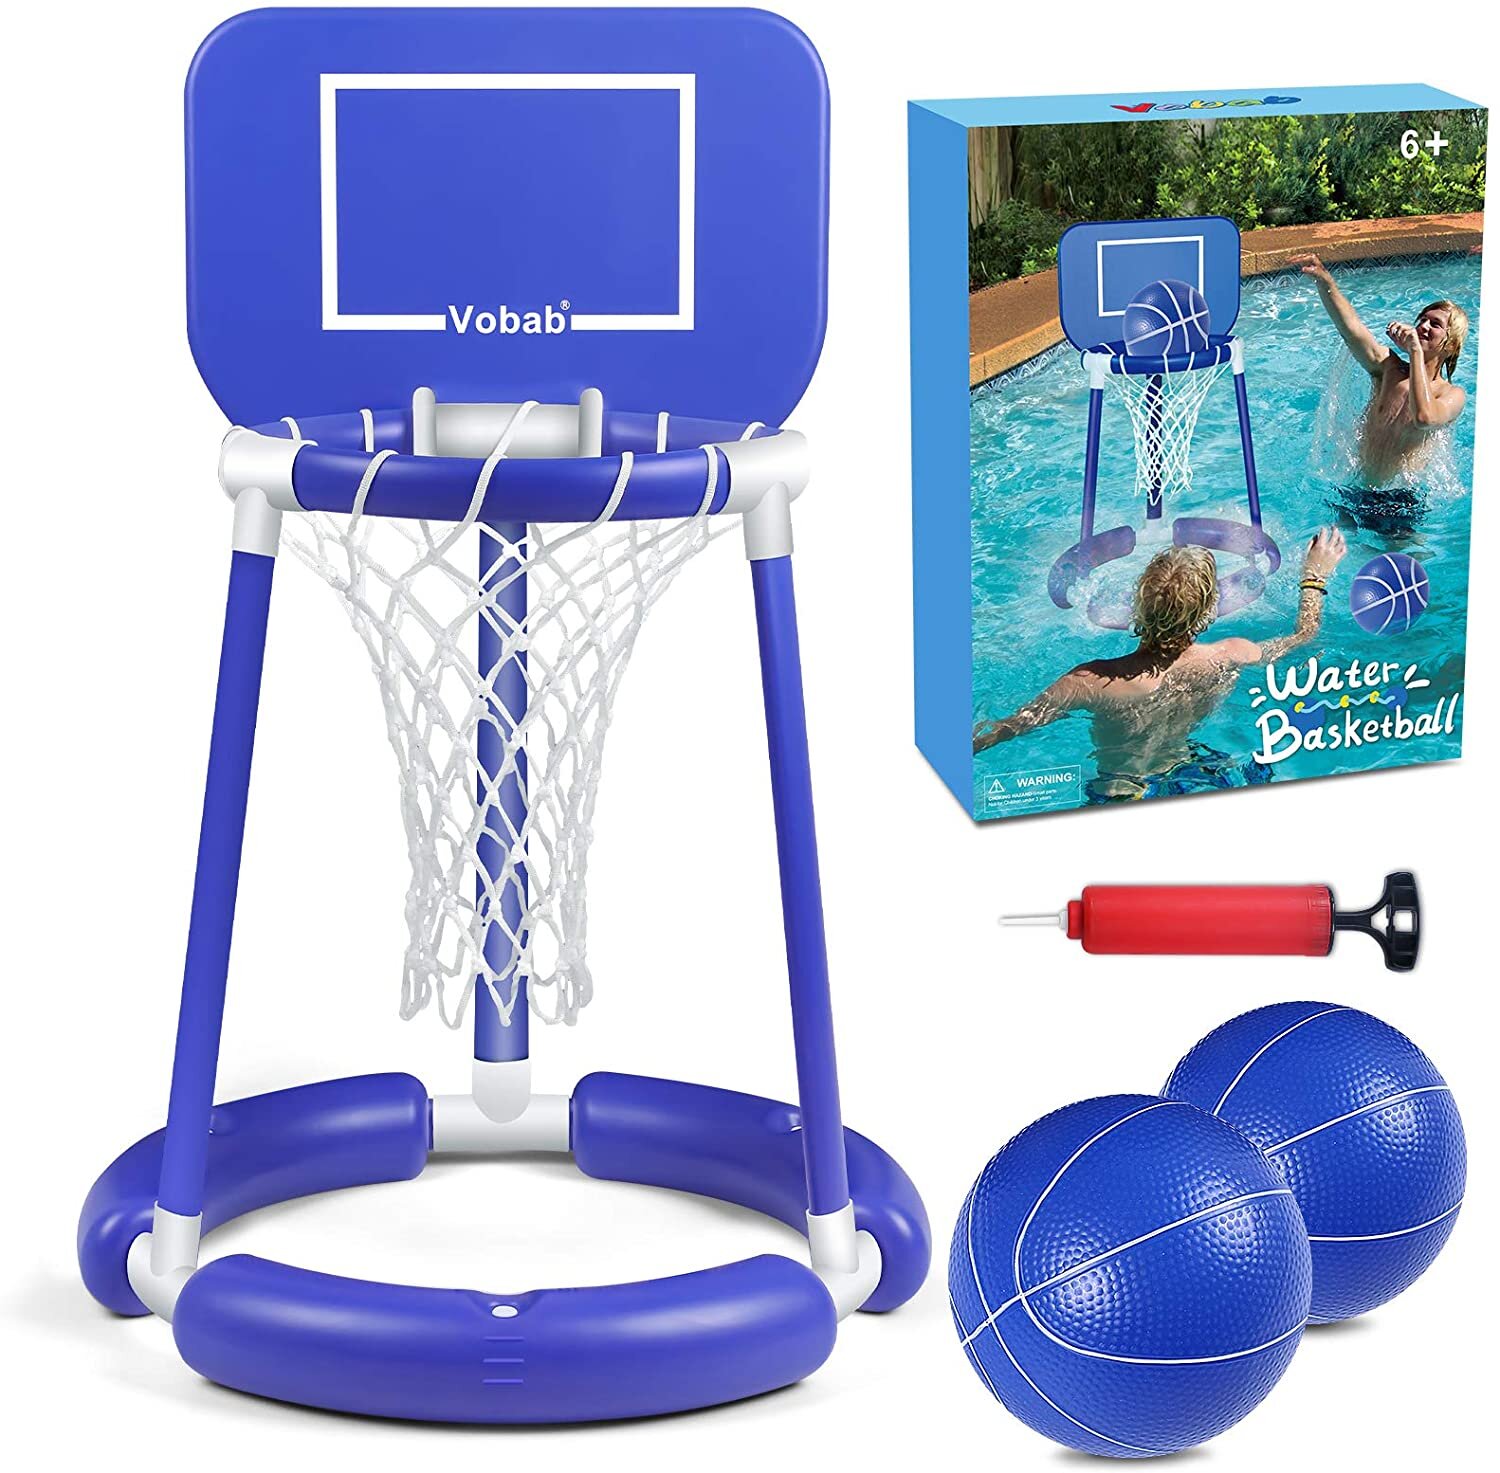 Basketball Shooting 1m timeracing Children Kids Ocean Ball Pit Pool Game Play Hoop Indoor Outdoor Ball Toy Tent